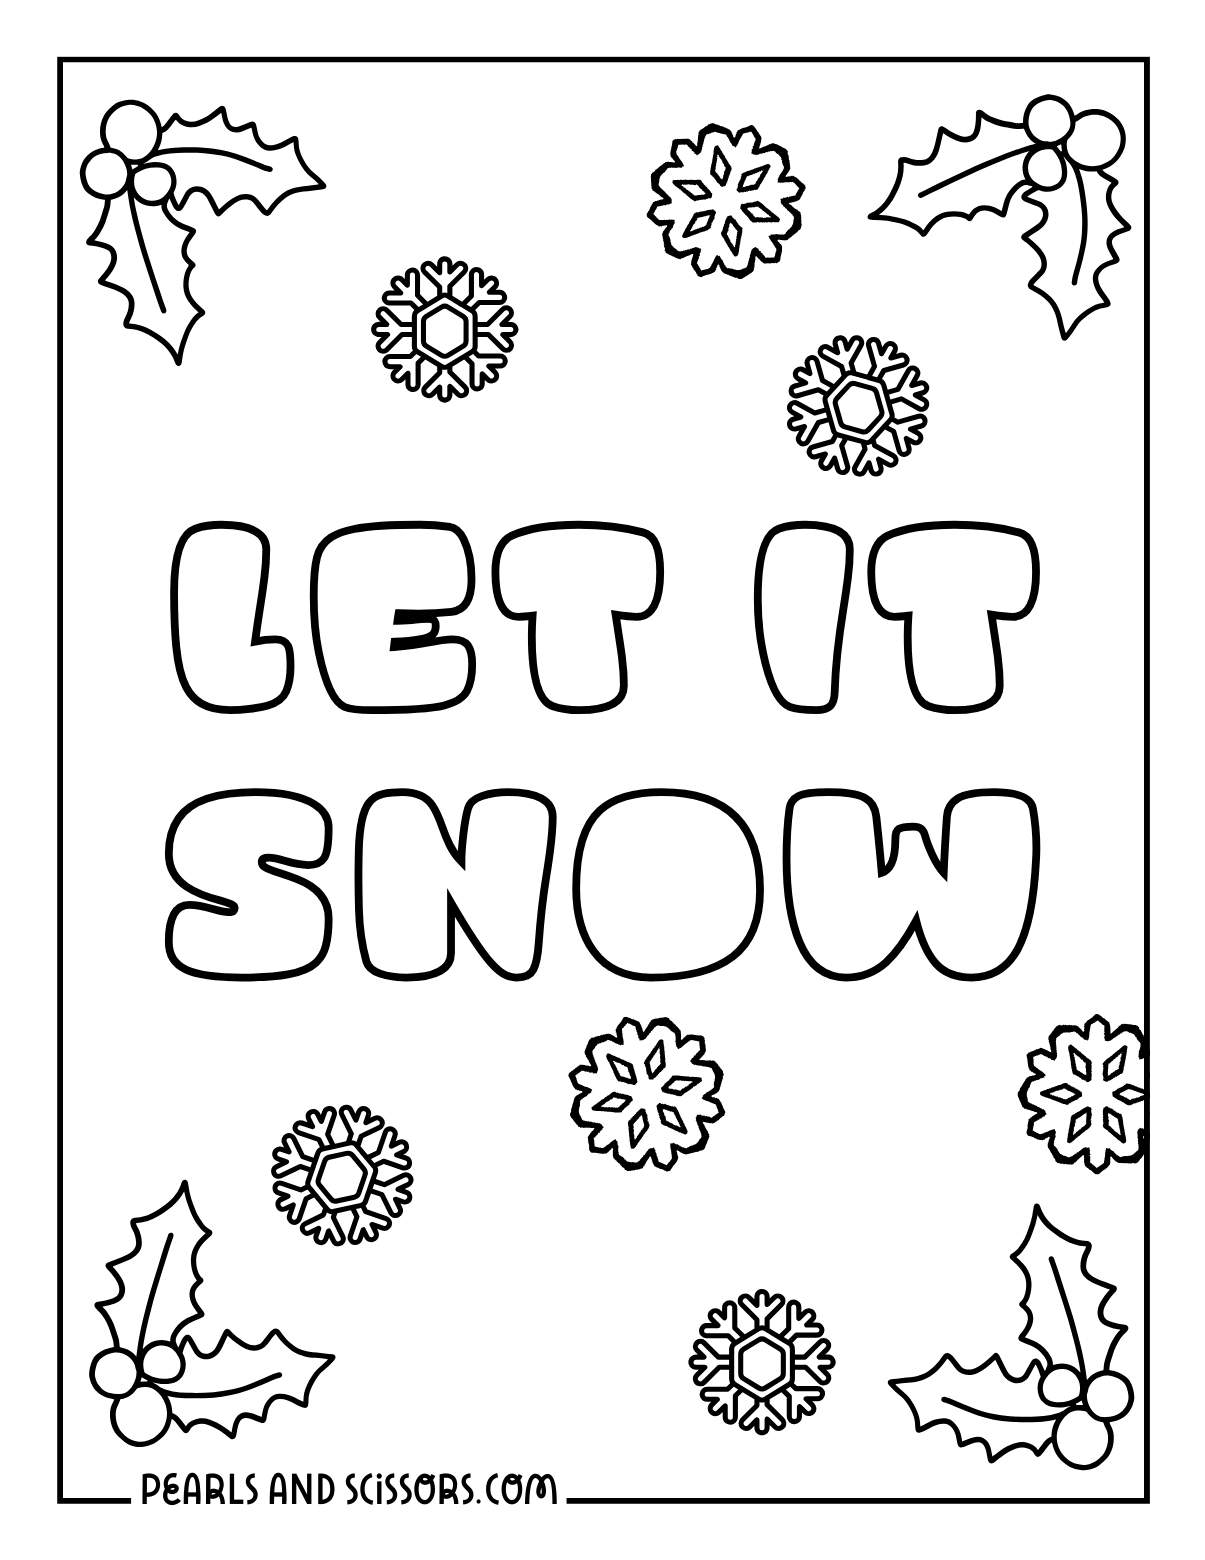 Let it snow christmas coloring page with snowflakes, mistletoe decoration.